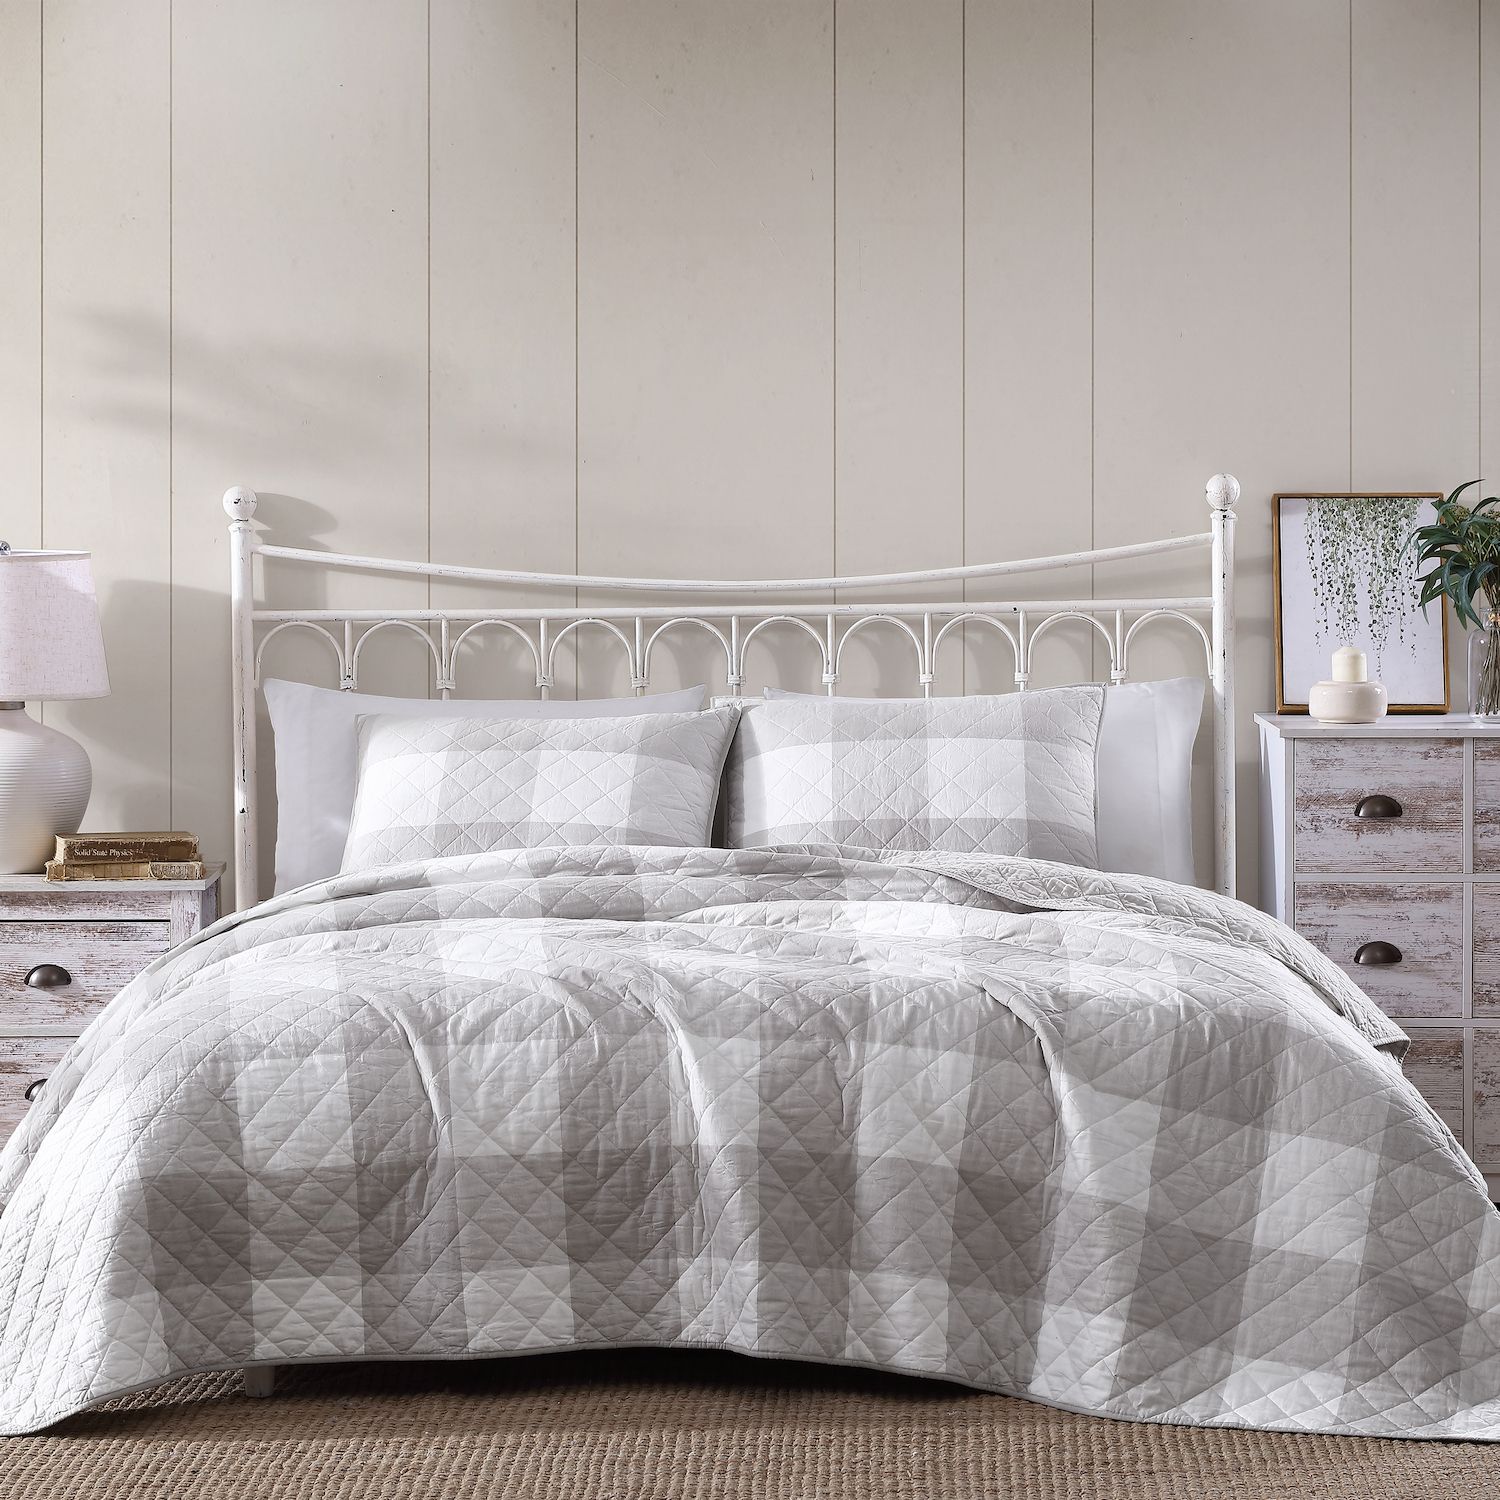 Image for heirloomed Heirloomed Buffalo Check Quilt Set with Shams at Kohl's.